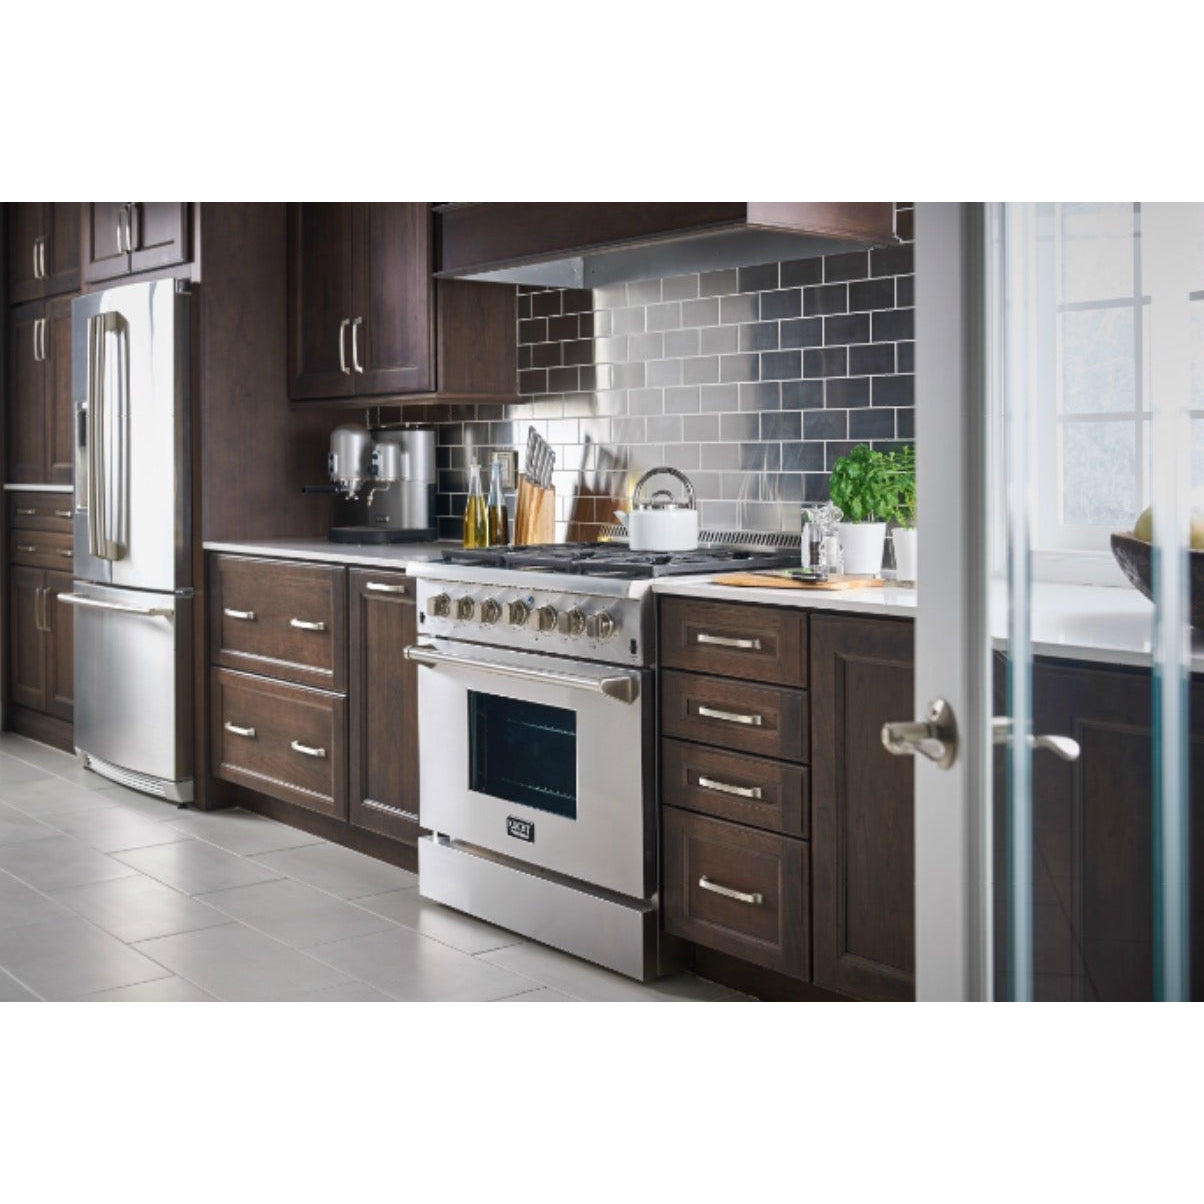 Kucht KRD Series 30" Freestanding Natural Gas Dual Fuel Range With 4 Burners and Classic Silver Knobs